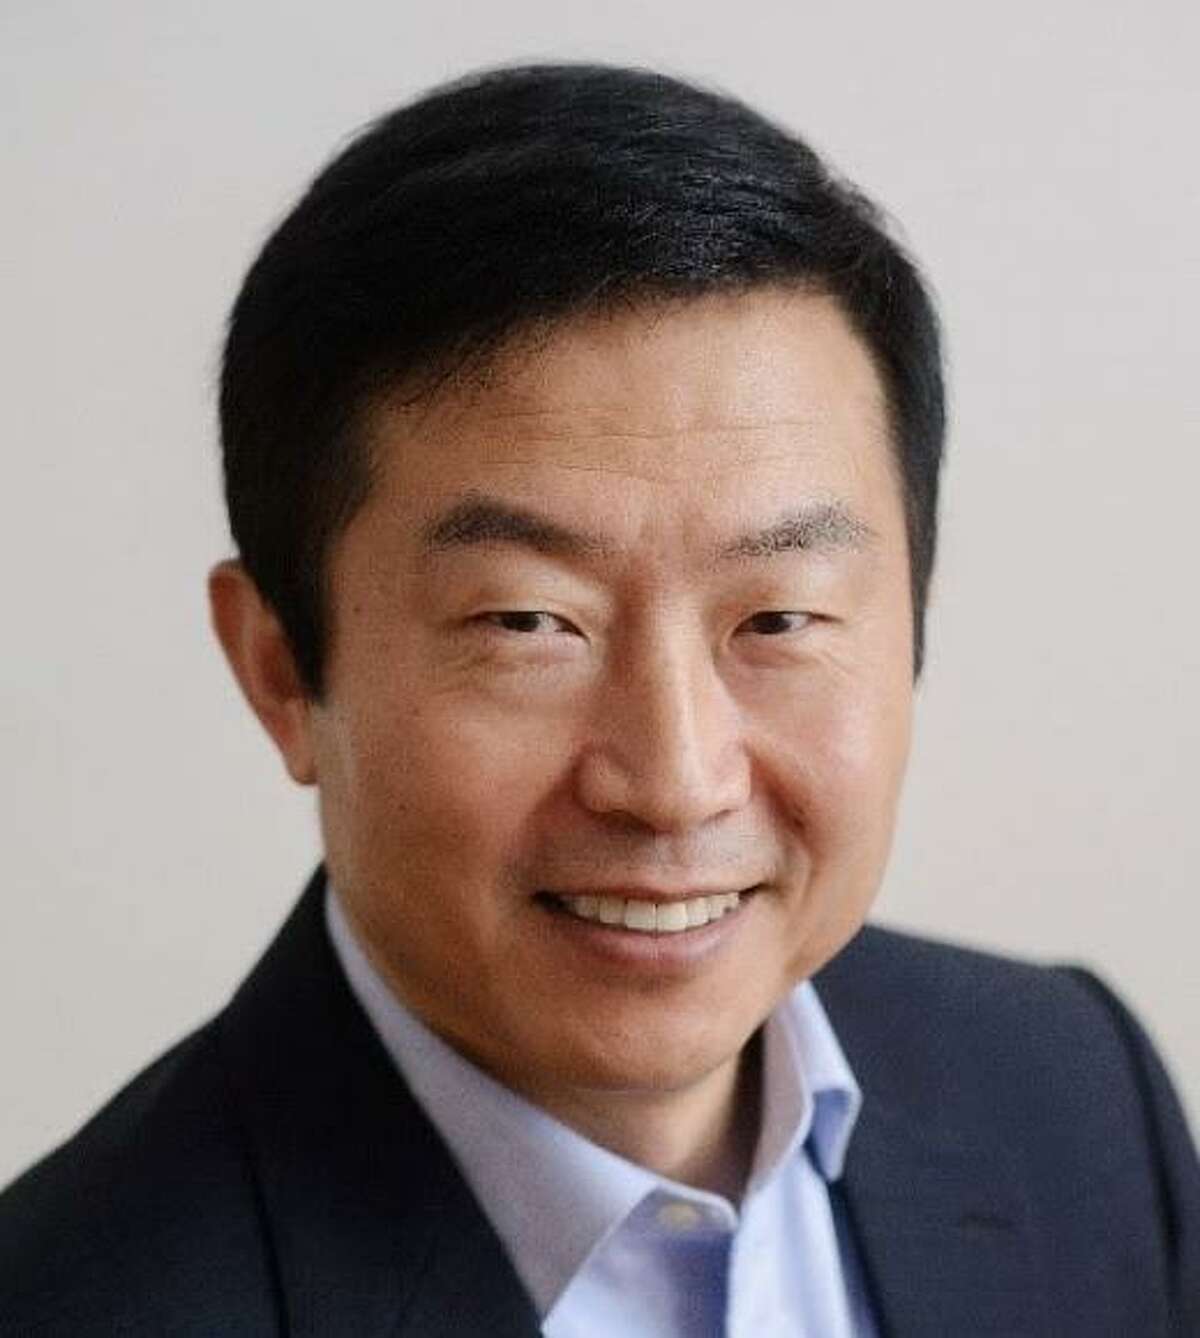 UC Davis Professor Ting Guo has been placed on paid leave.